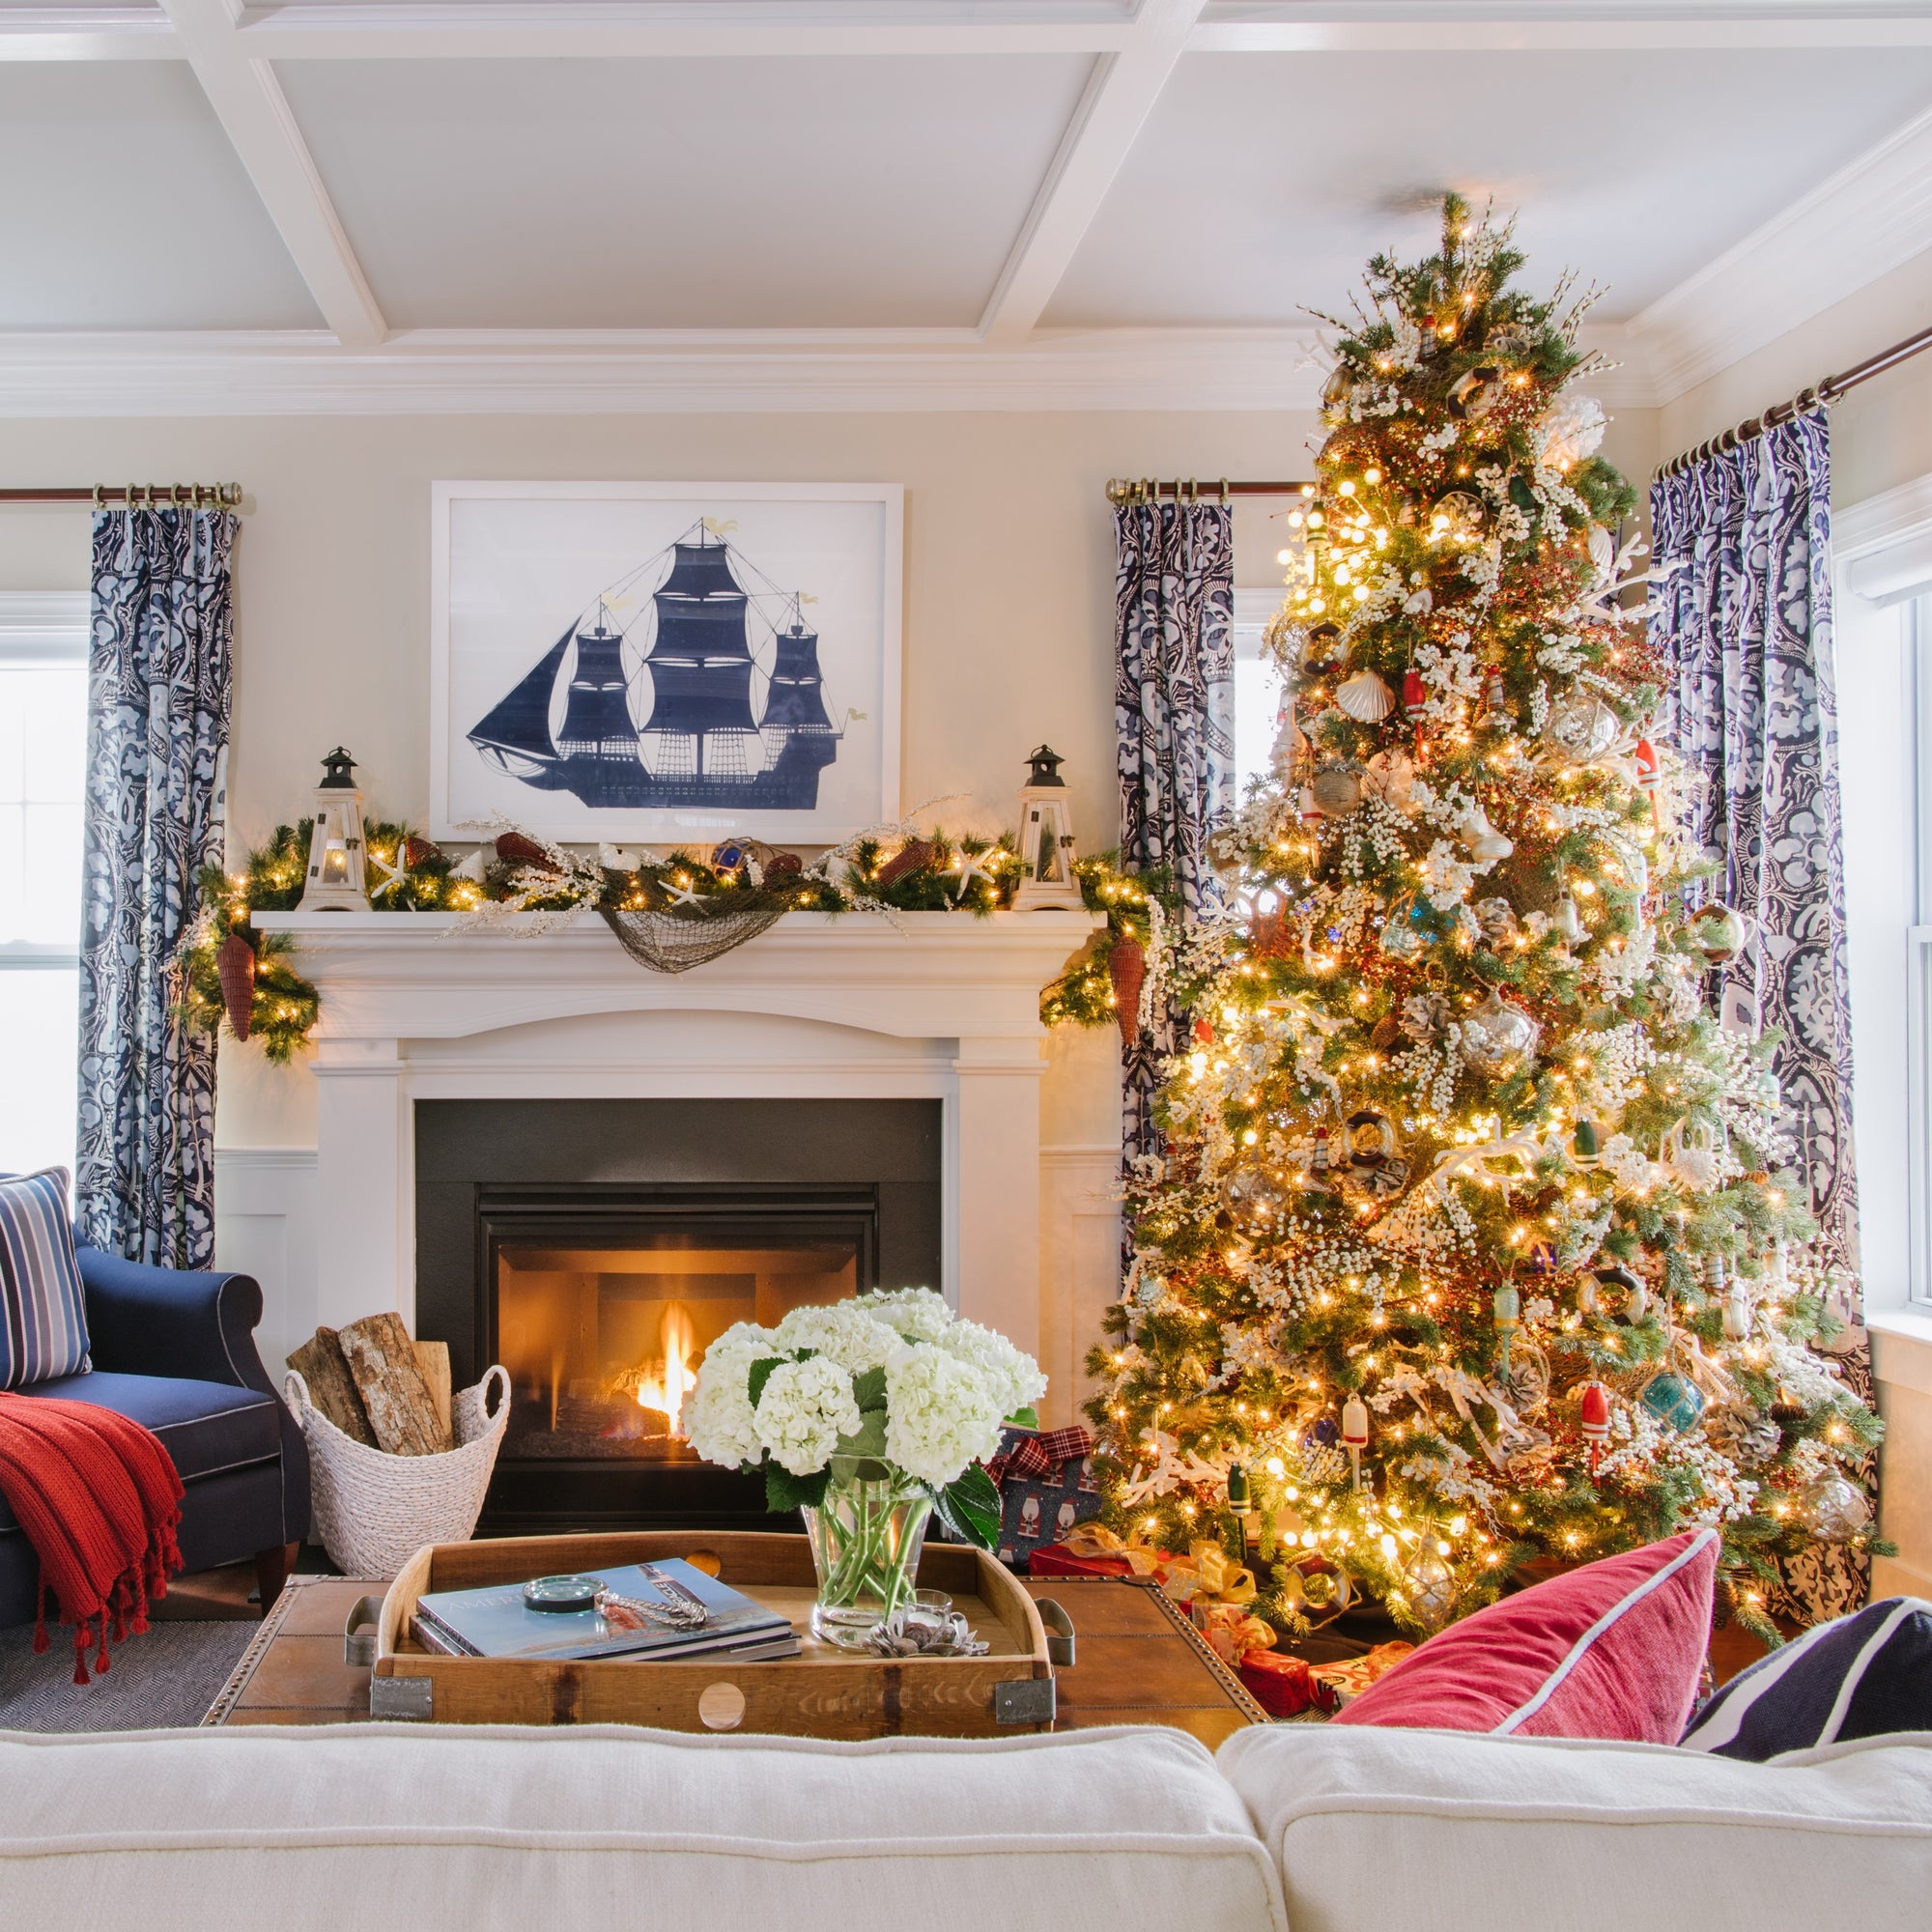 Warm living room with fireplace and brightly lit Christmas tree. Interior design by Jamie Merida.